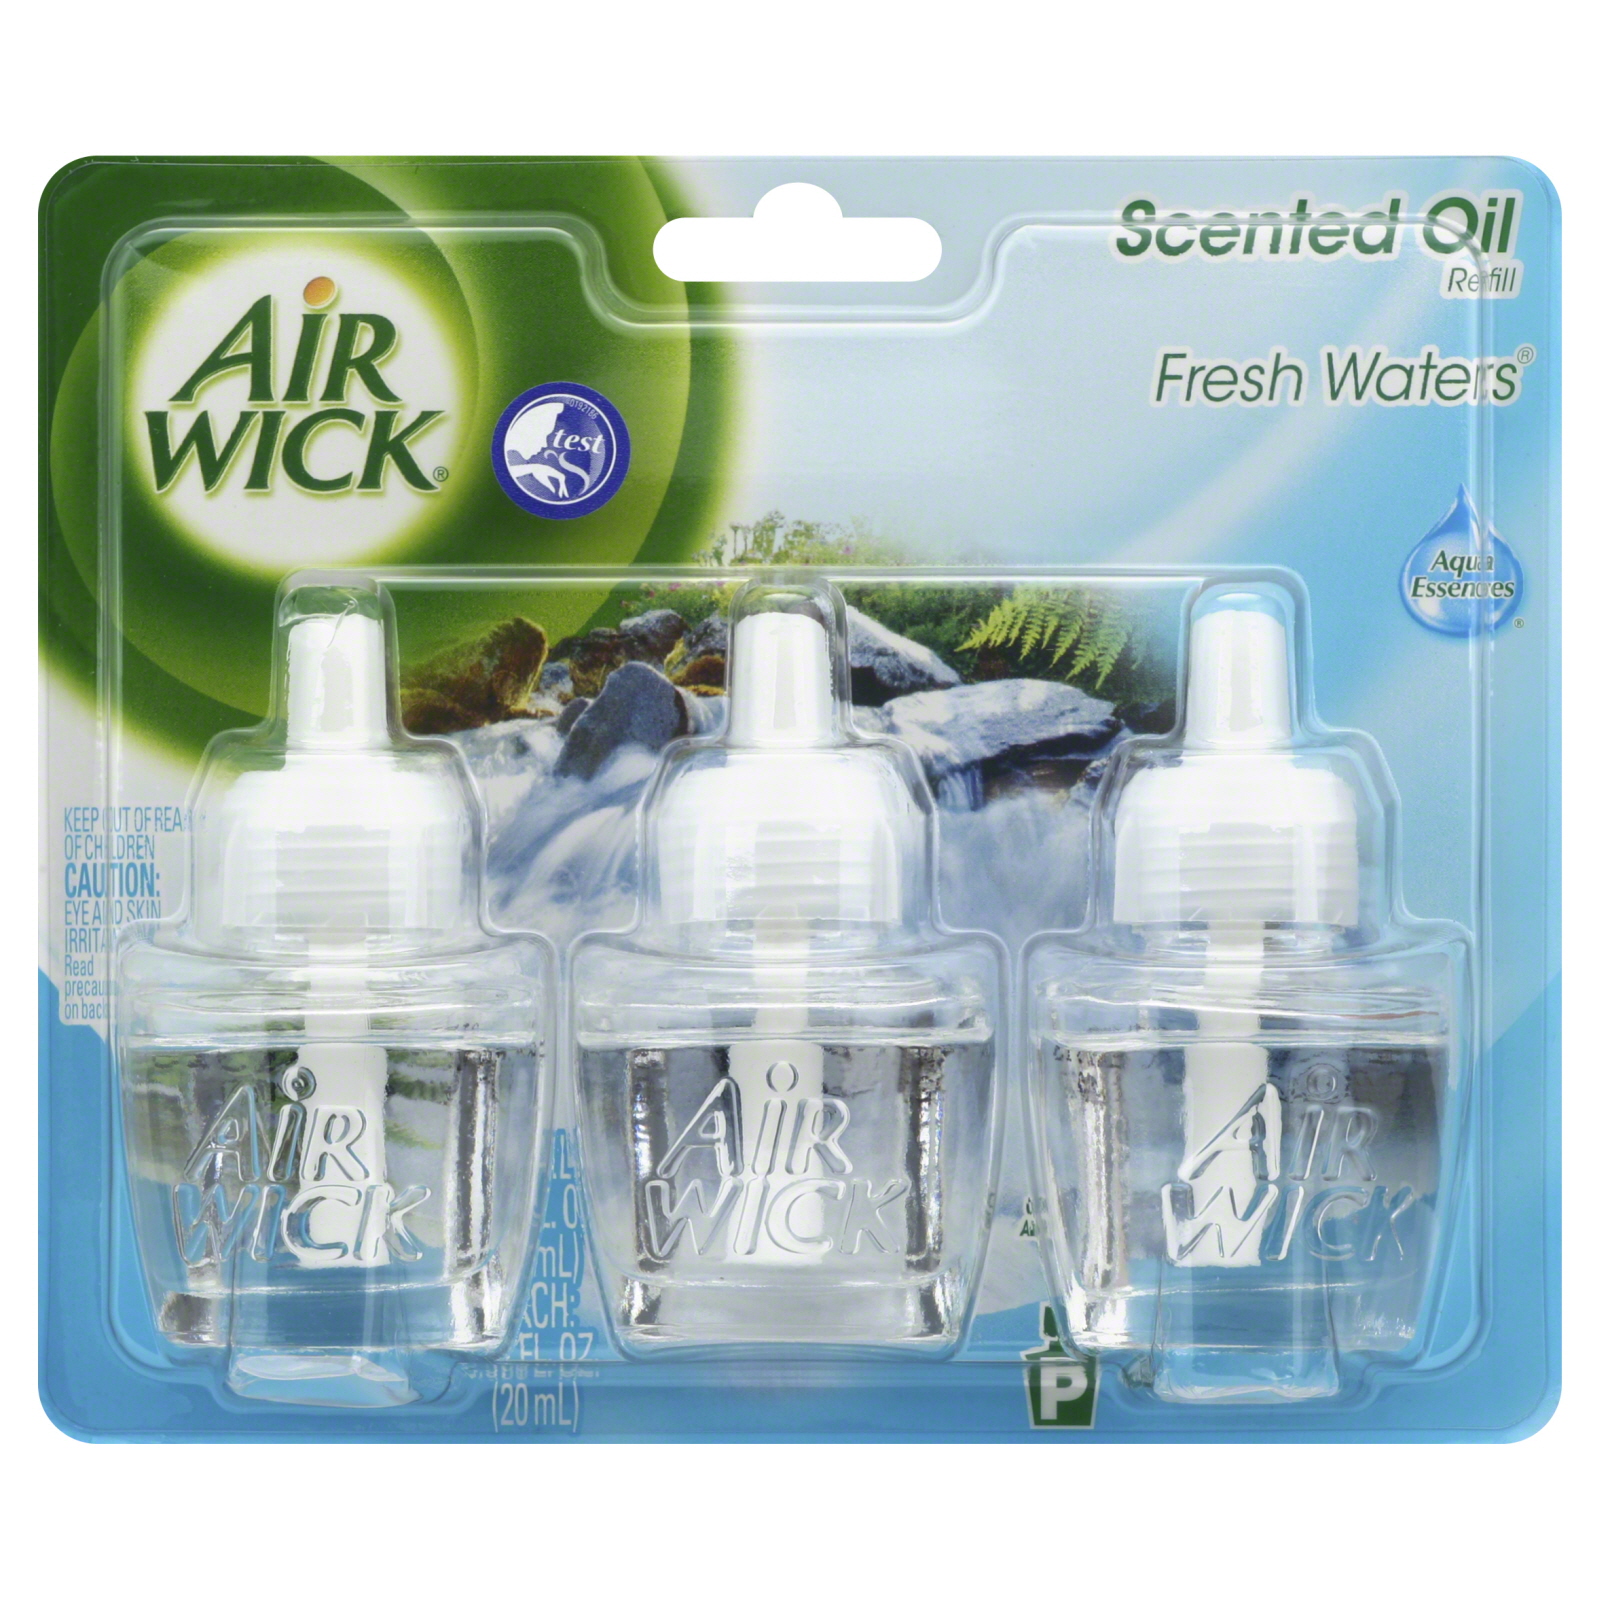 Airwick Fresh Waters Scented Oil Refills